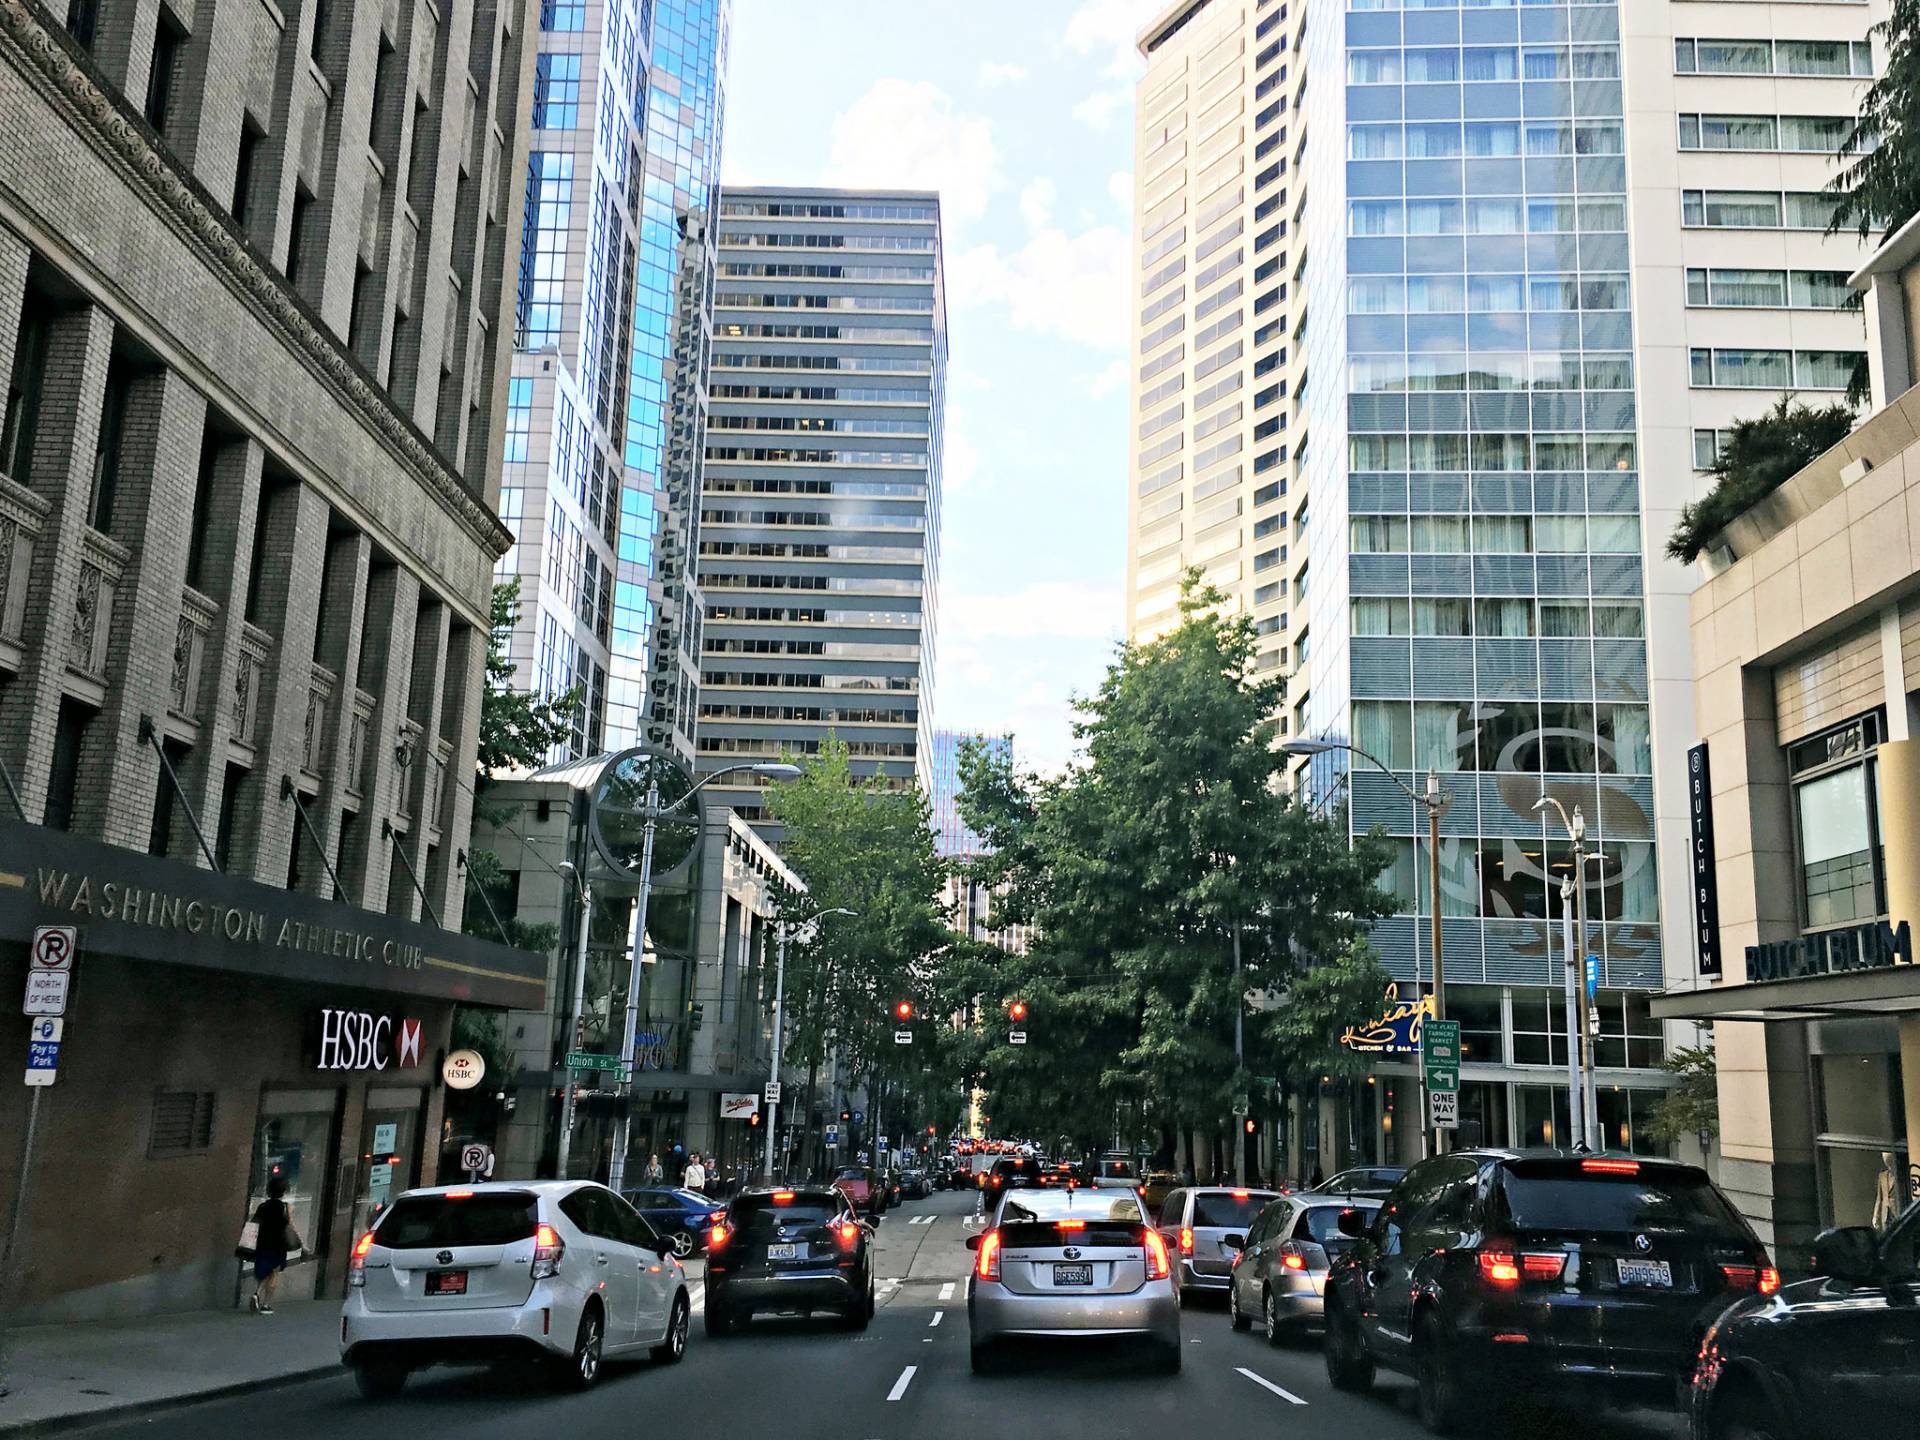 Union St. & 6th St. Intersection in Downtown Seattle